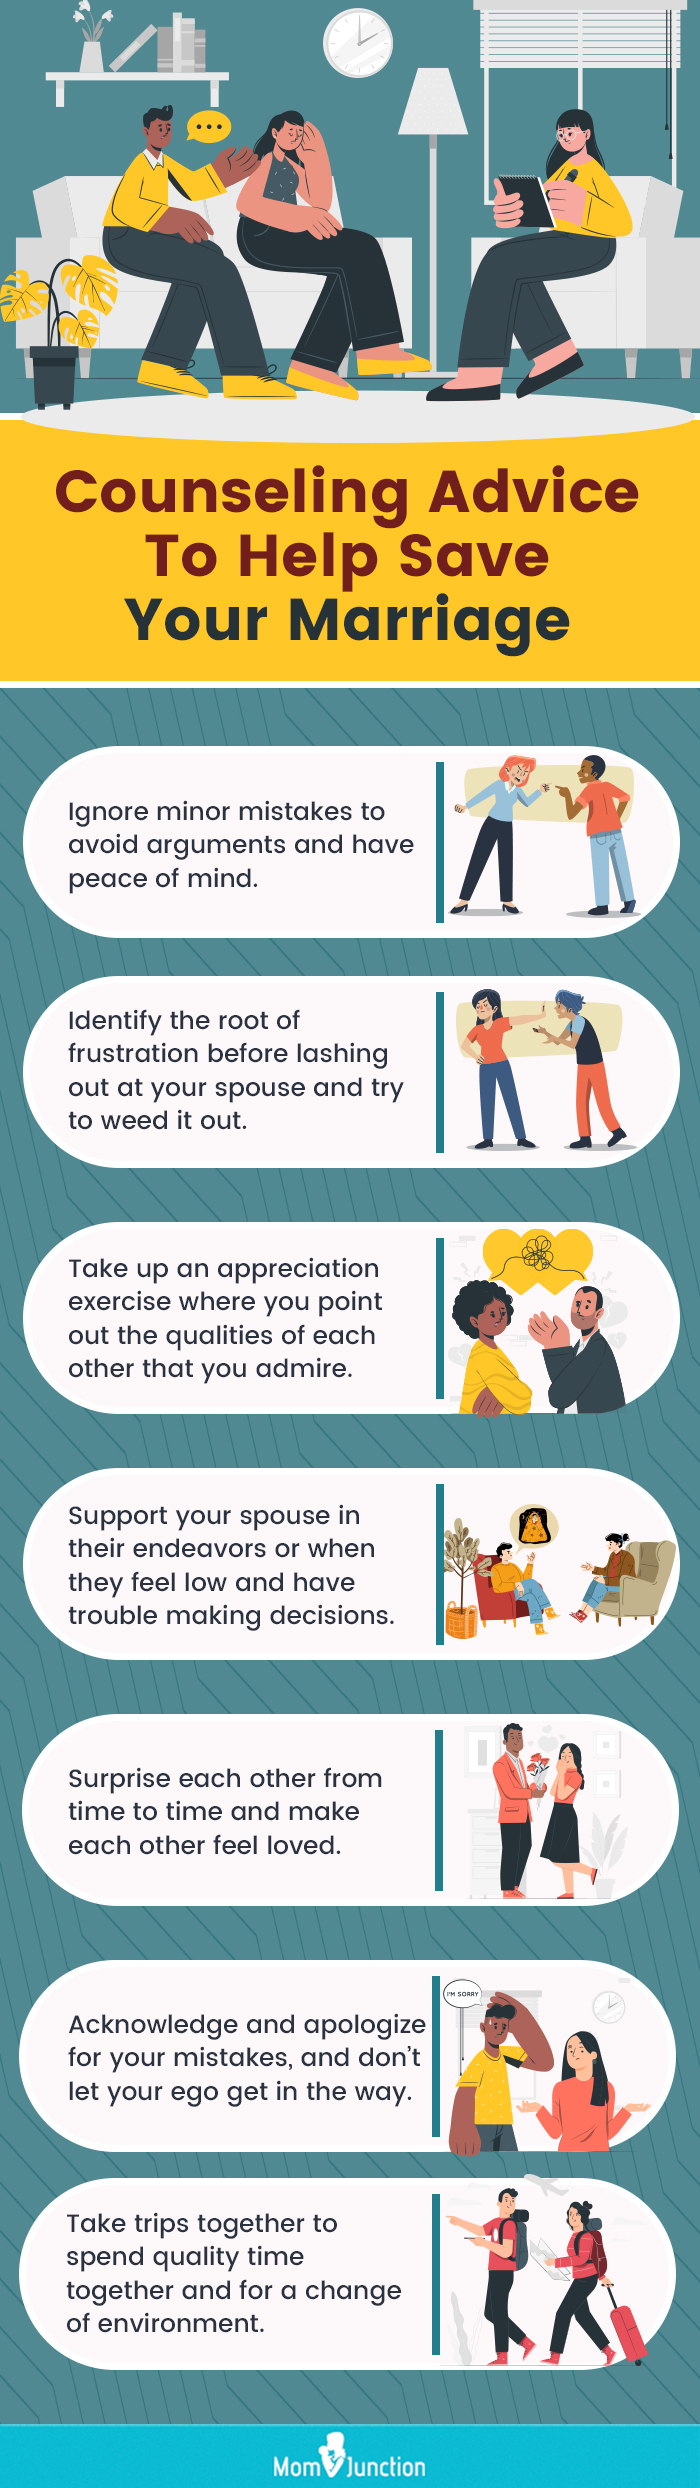 counseling advice to help save your marriage (infographic)